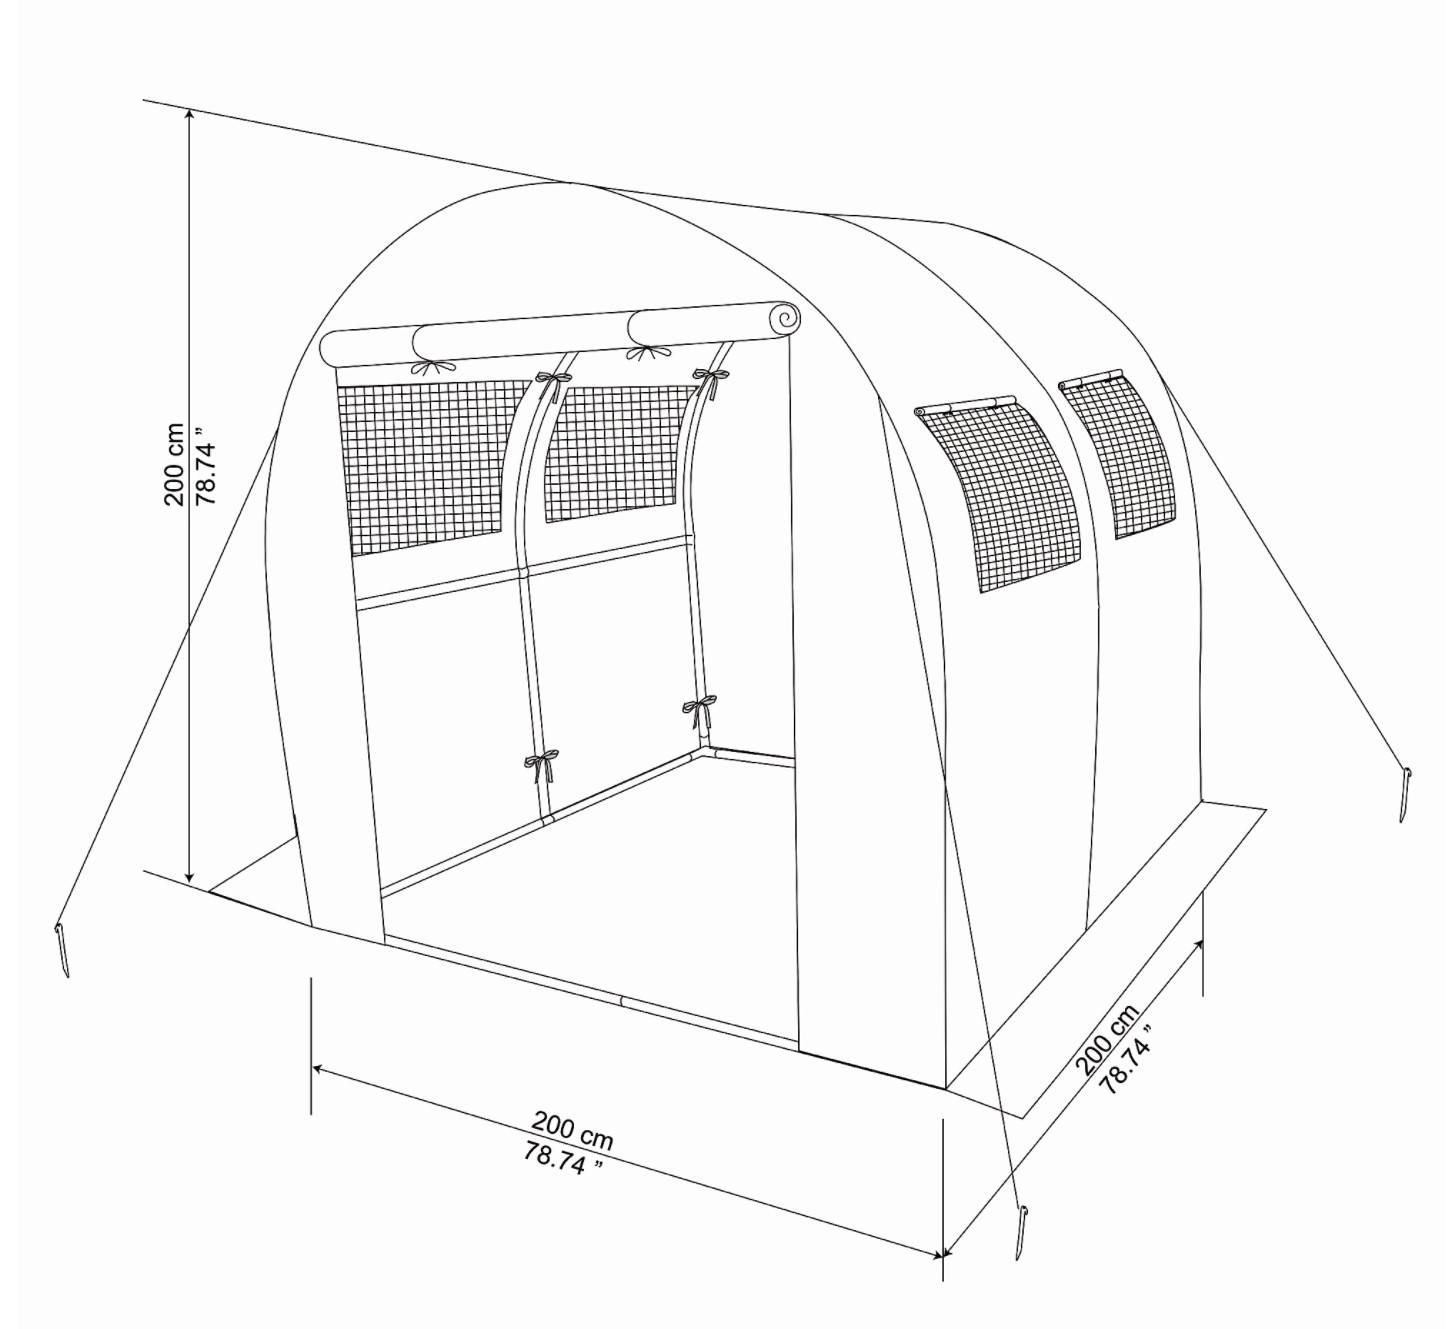 4m² Polytunnel greenhouse flexible Plastic - Light Structure - Easy Access - Vent Window